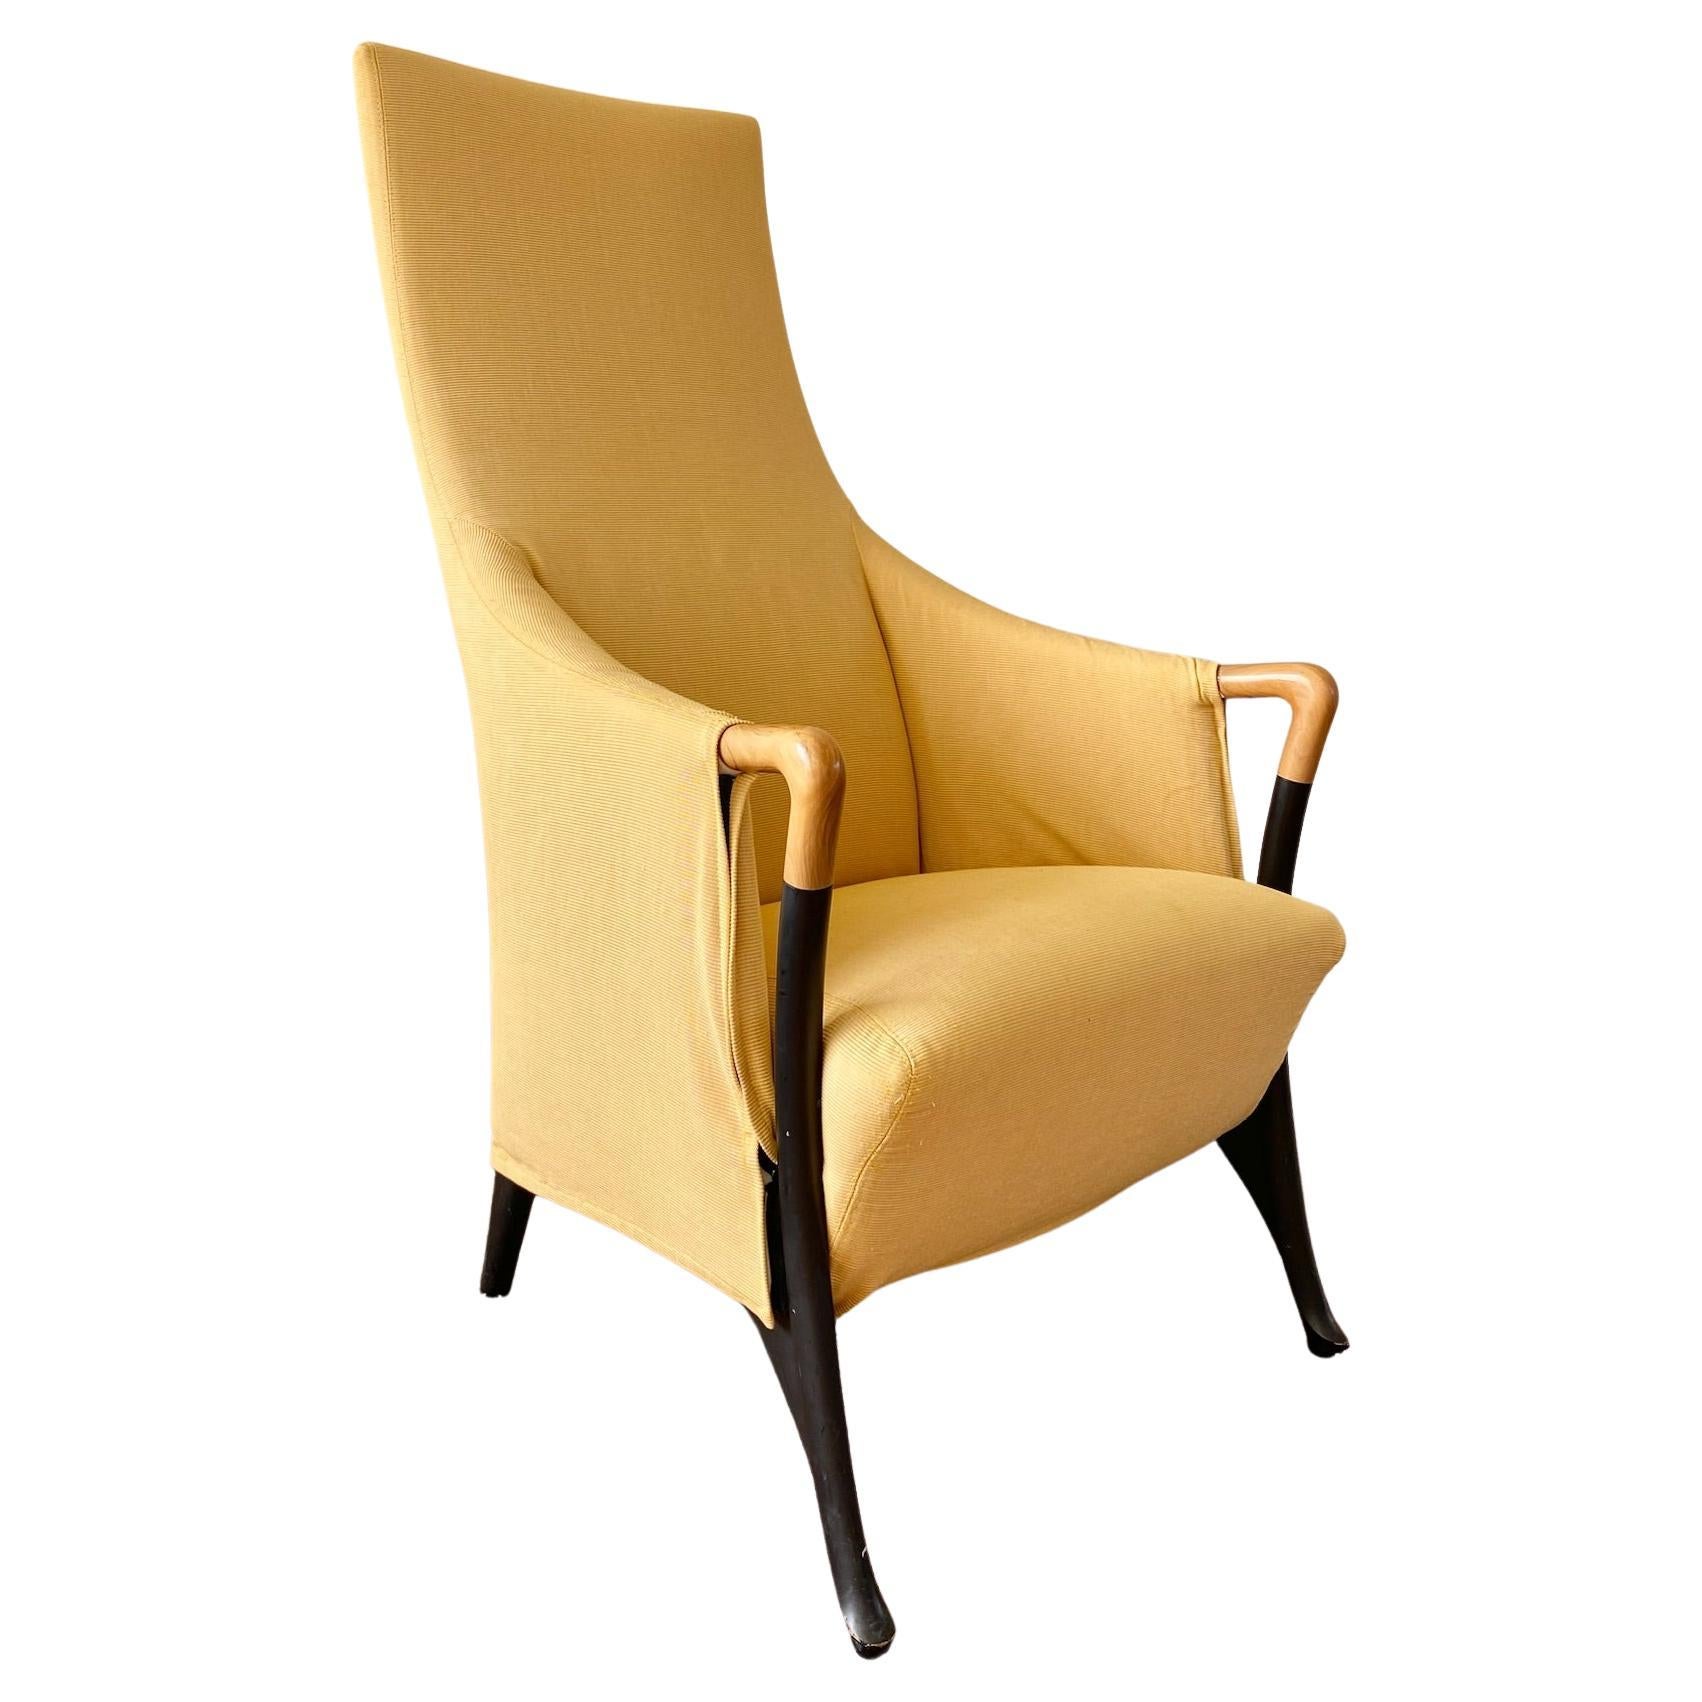 Giorgetti Progetti Yellow Wing chair, Highback Chair. For Sale